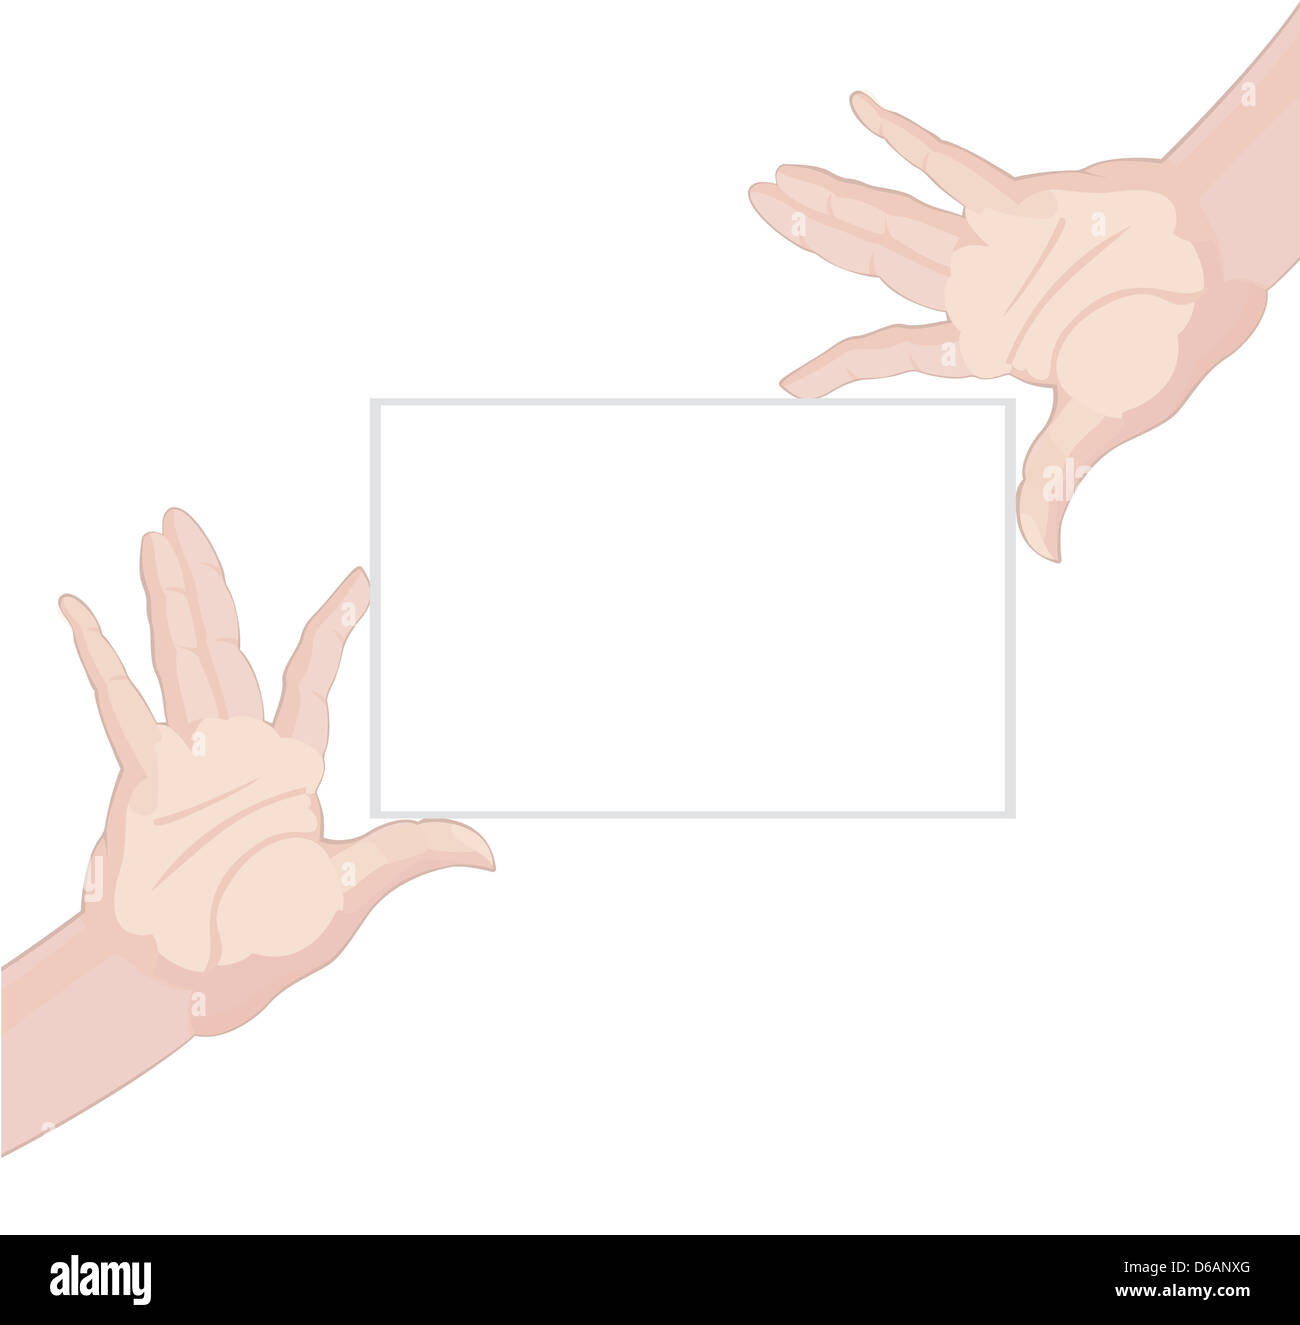 Human-hands-holding-blank-paper Stock Photo